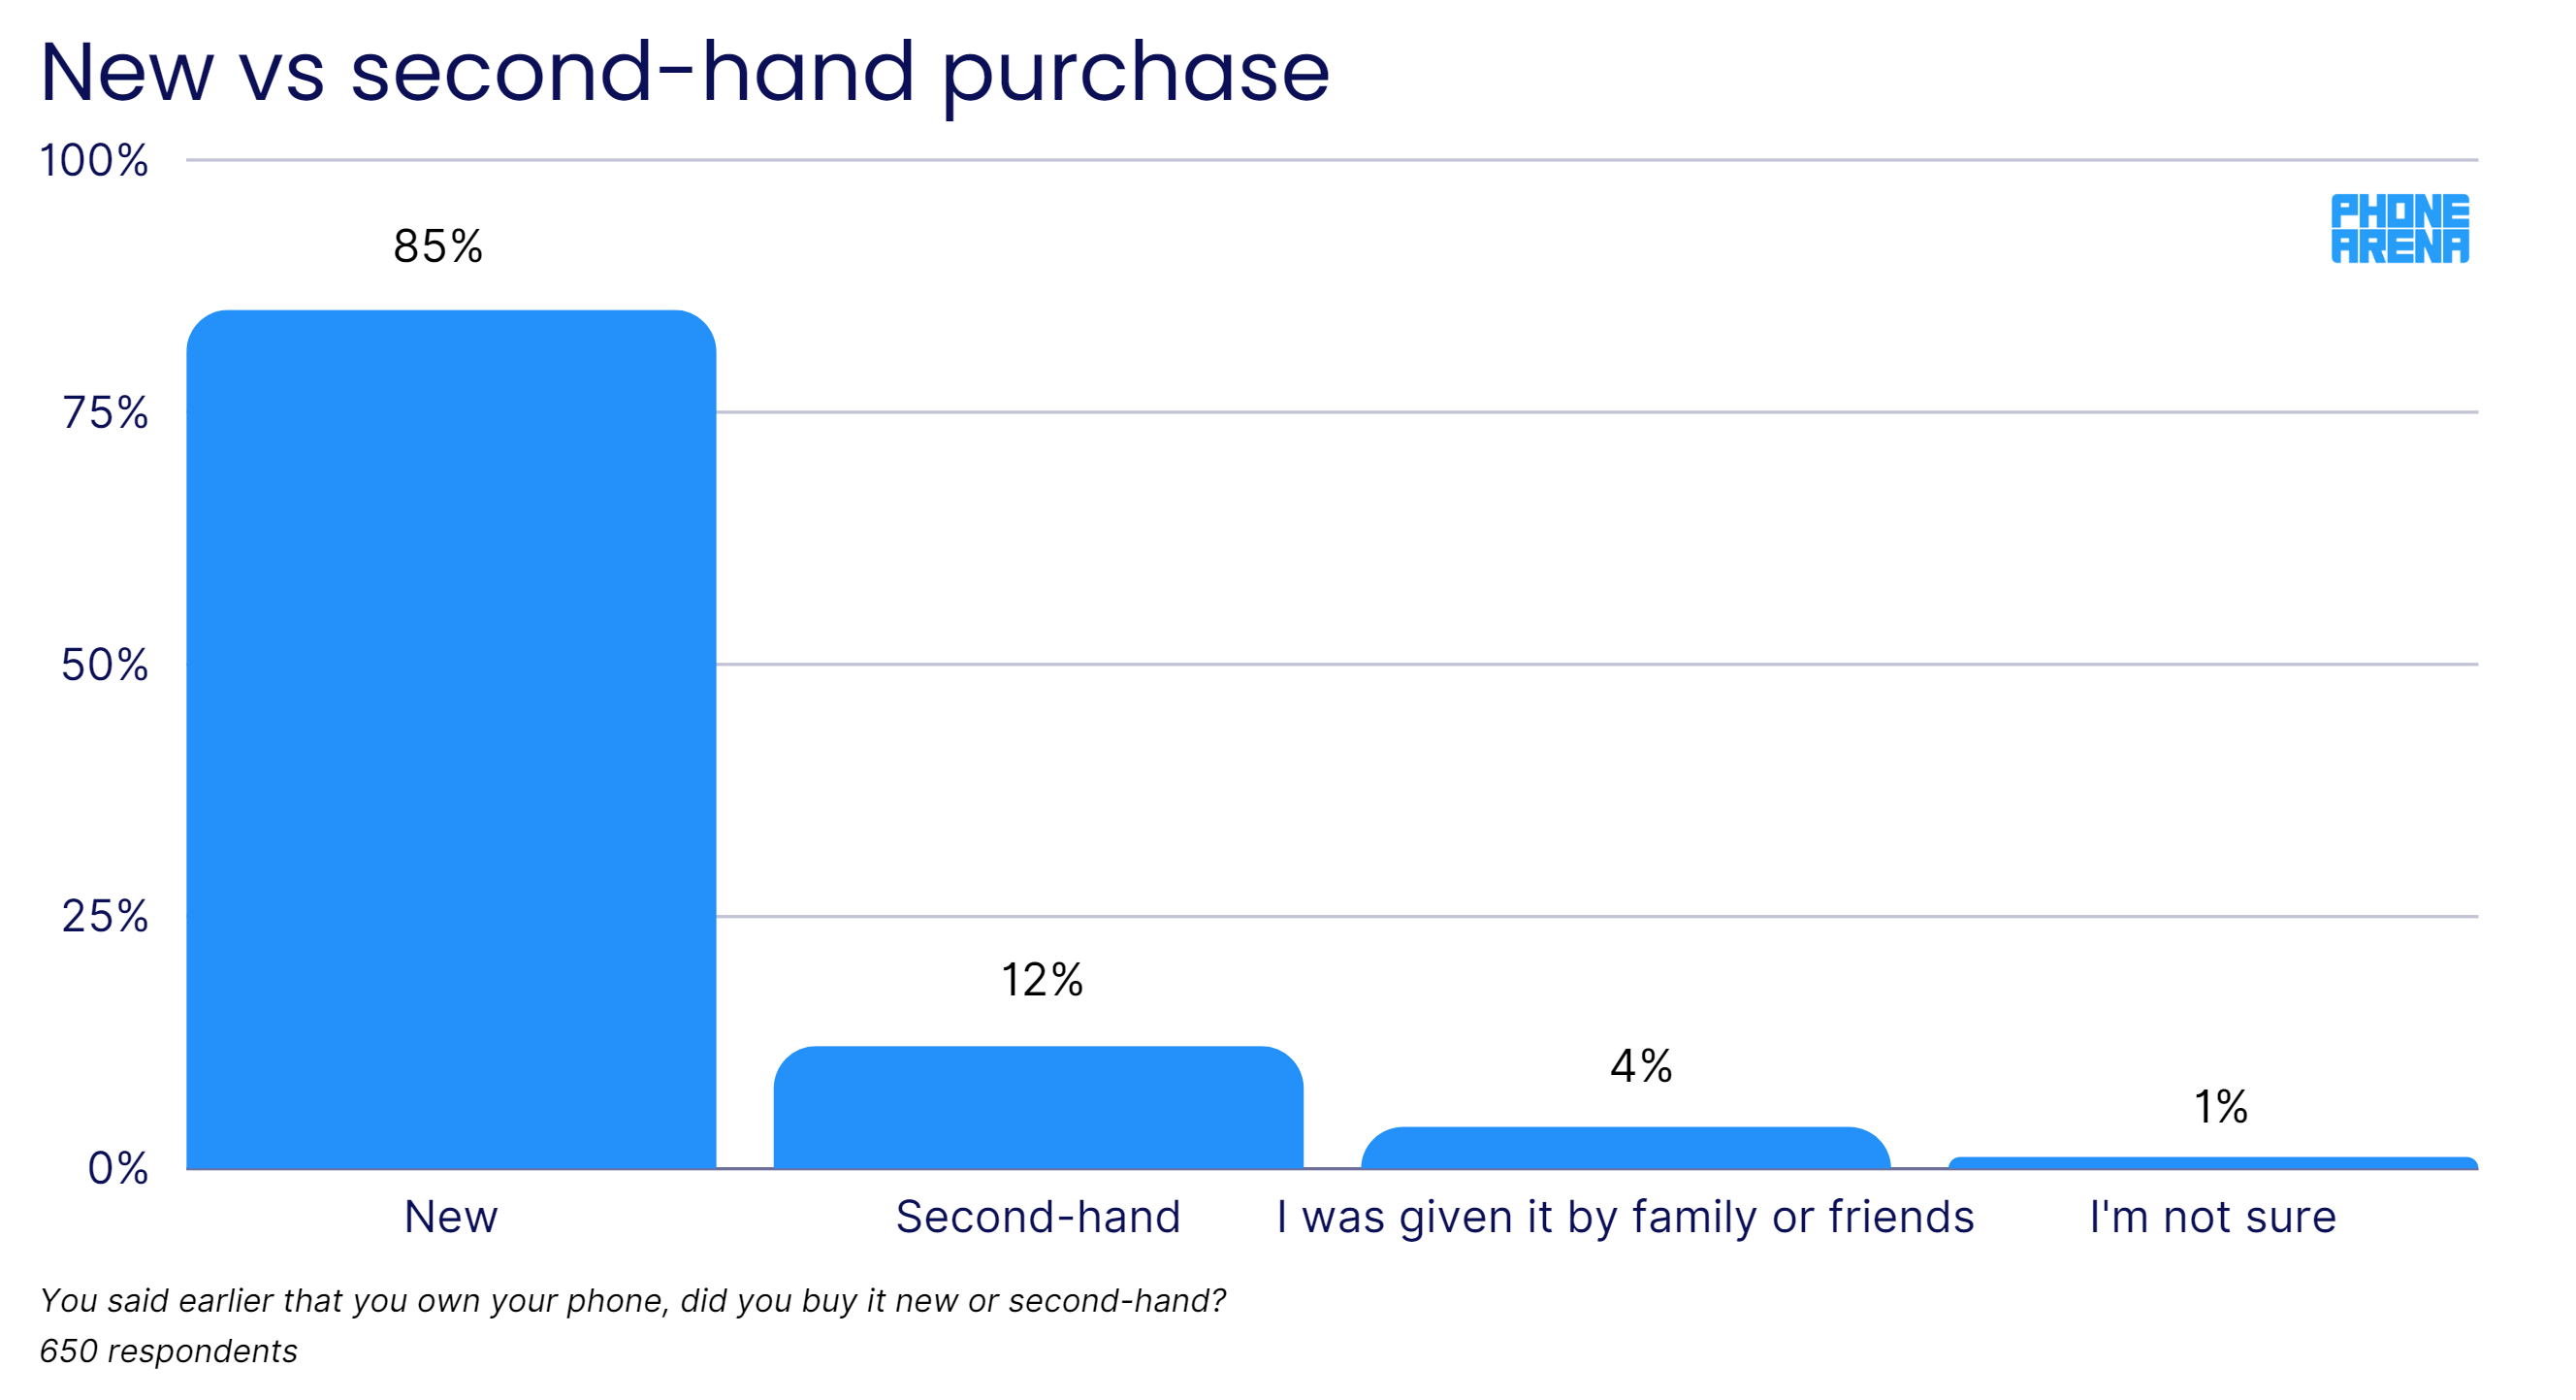 Image credit - PhoneArena - Survey says: Americans don’t like second-hand phones, but US youths are considering them